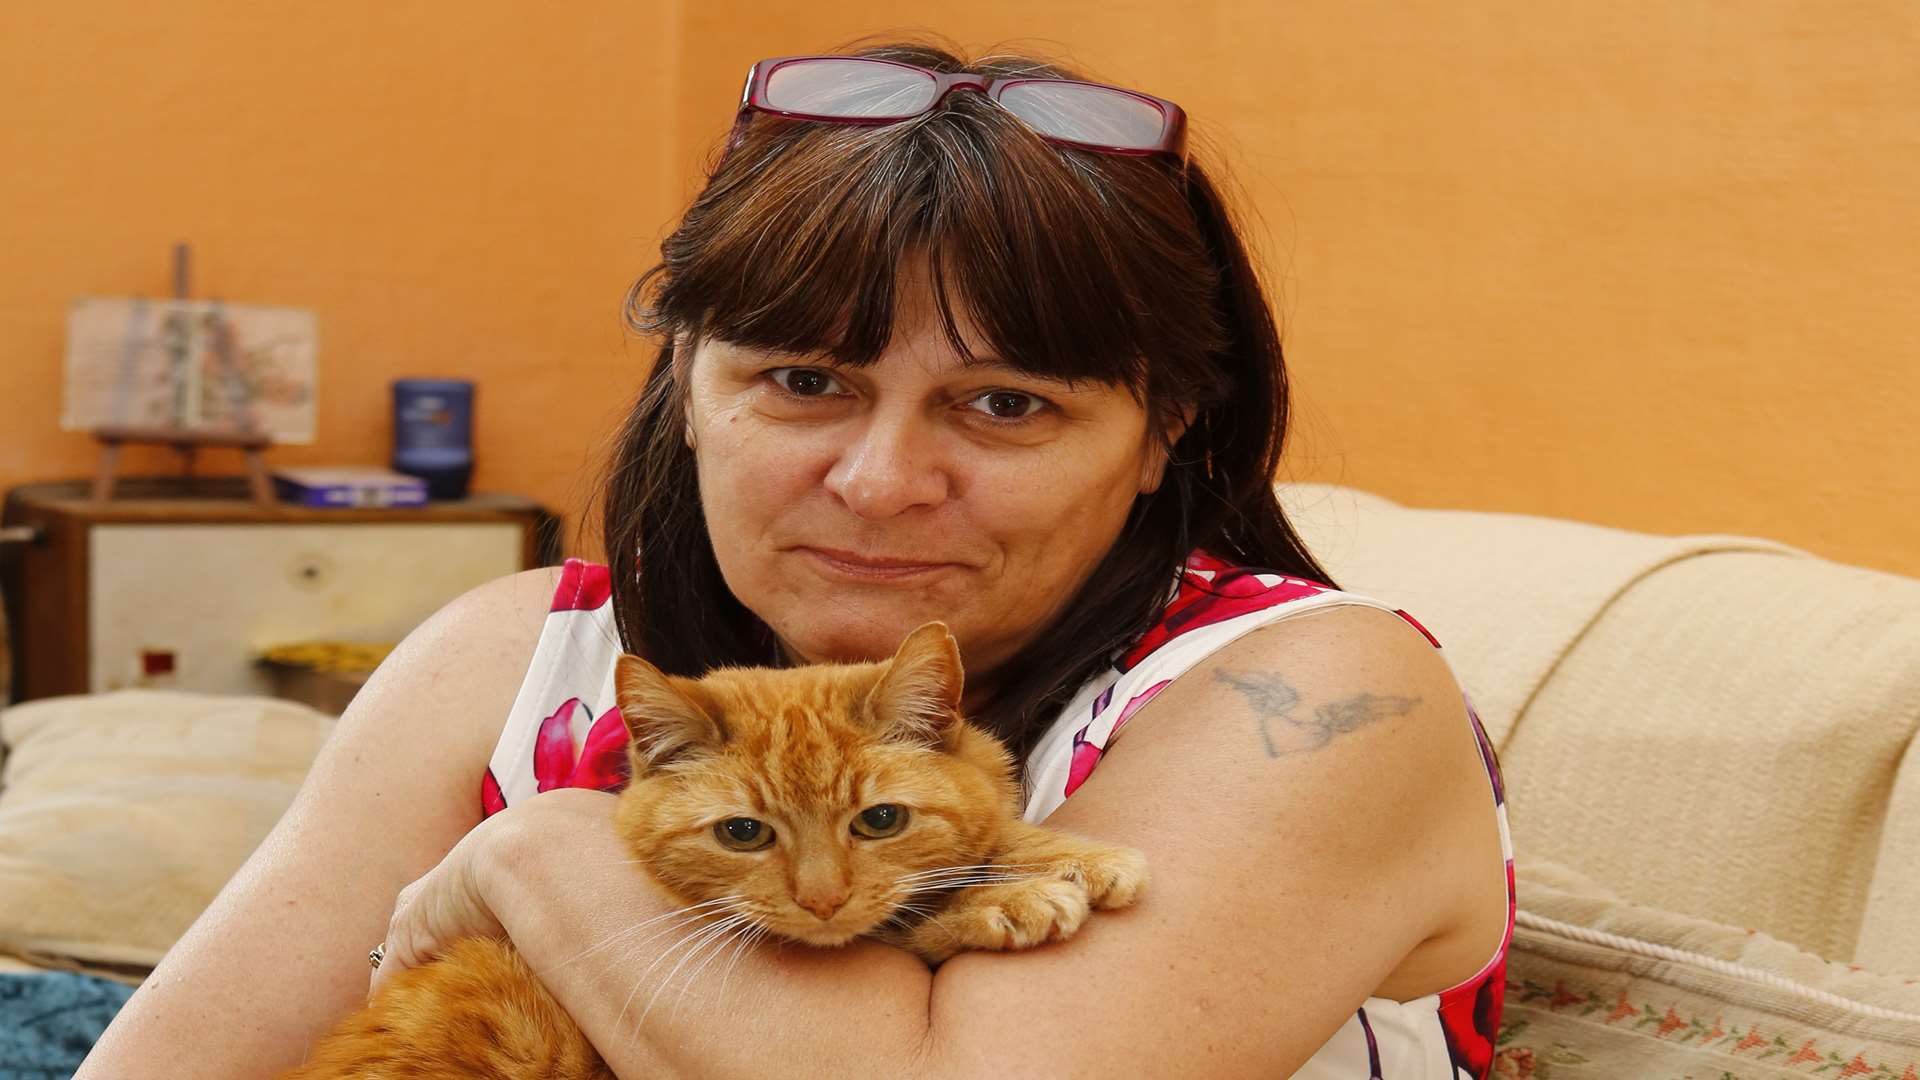 Adele Ankers and her cat Lewi, who was injured by a flea collar. Picture: Andy Jones.